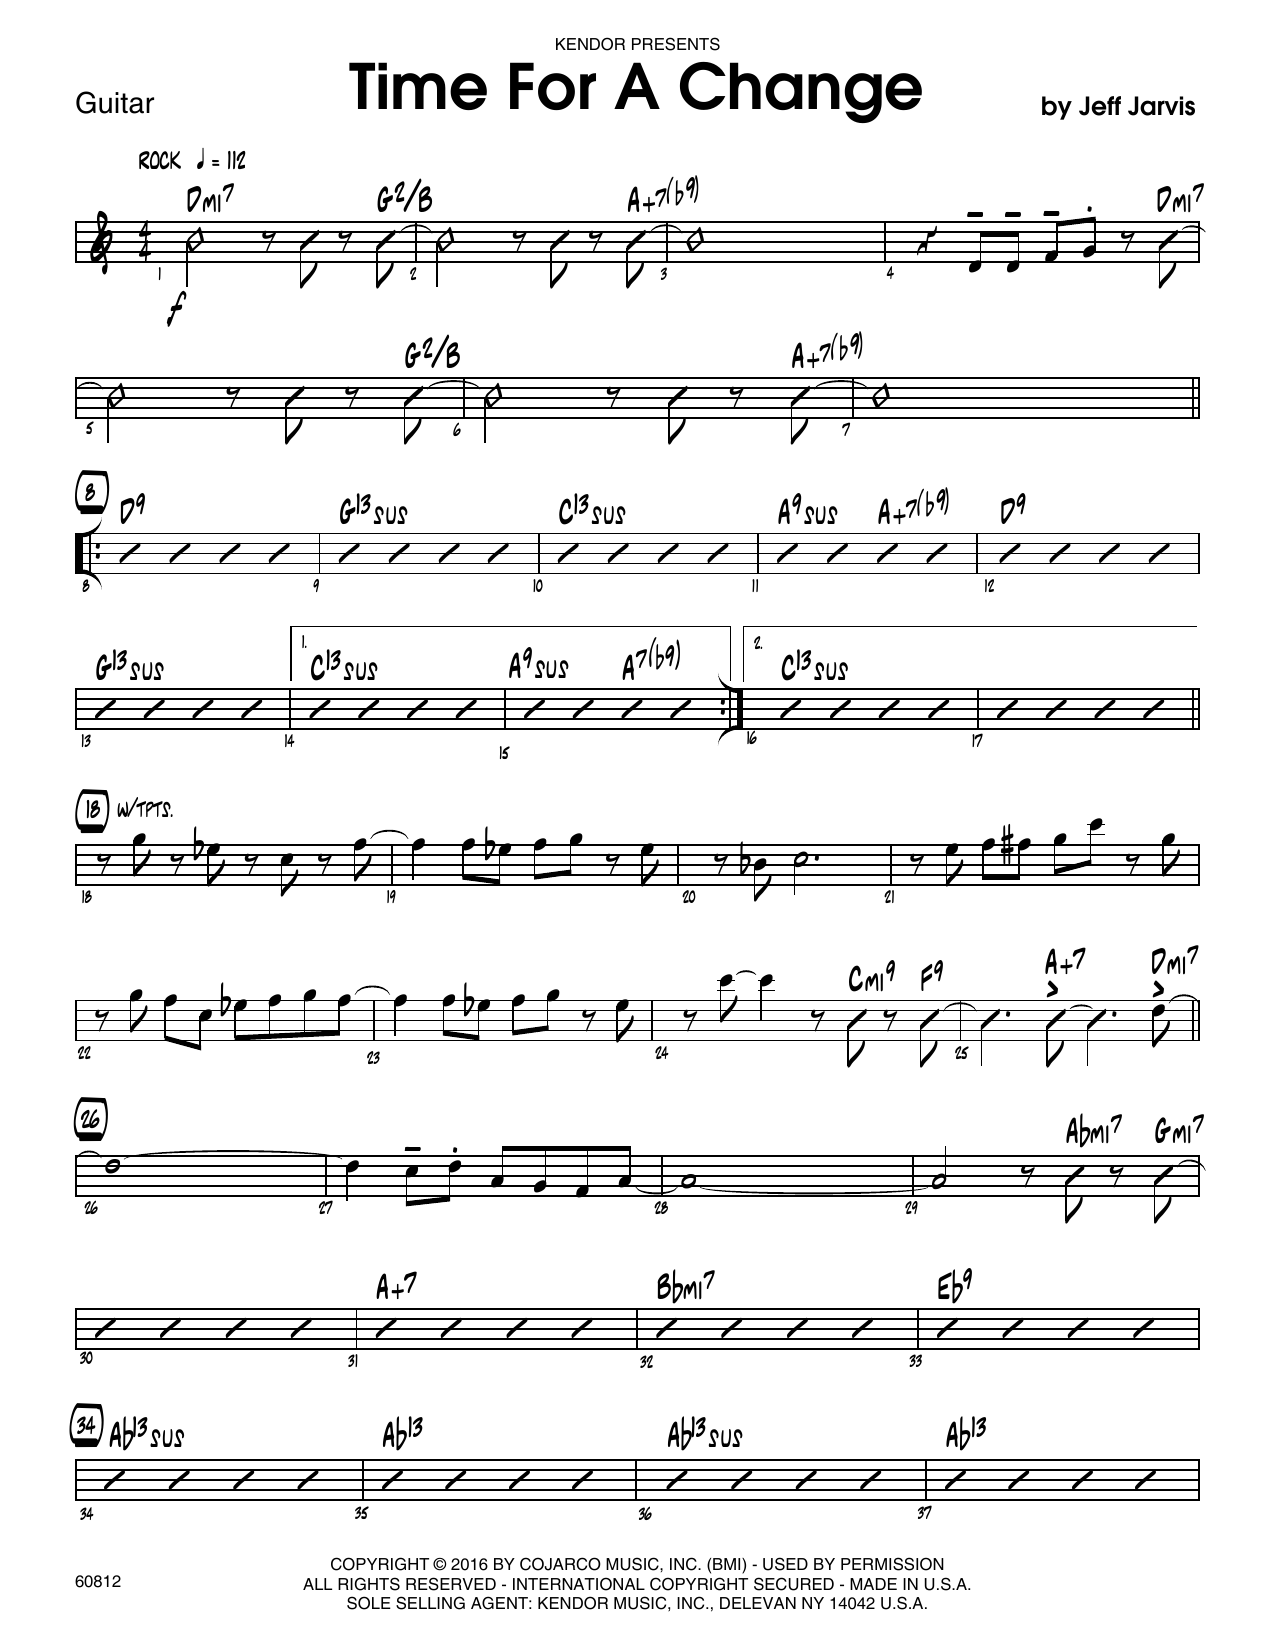 Download Jeff Jarvis Time For A Change - Guitar Sheet Music